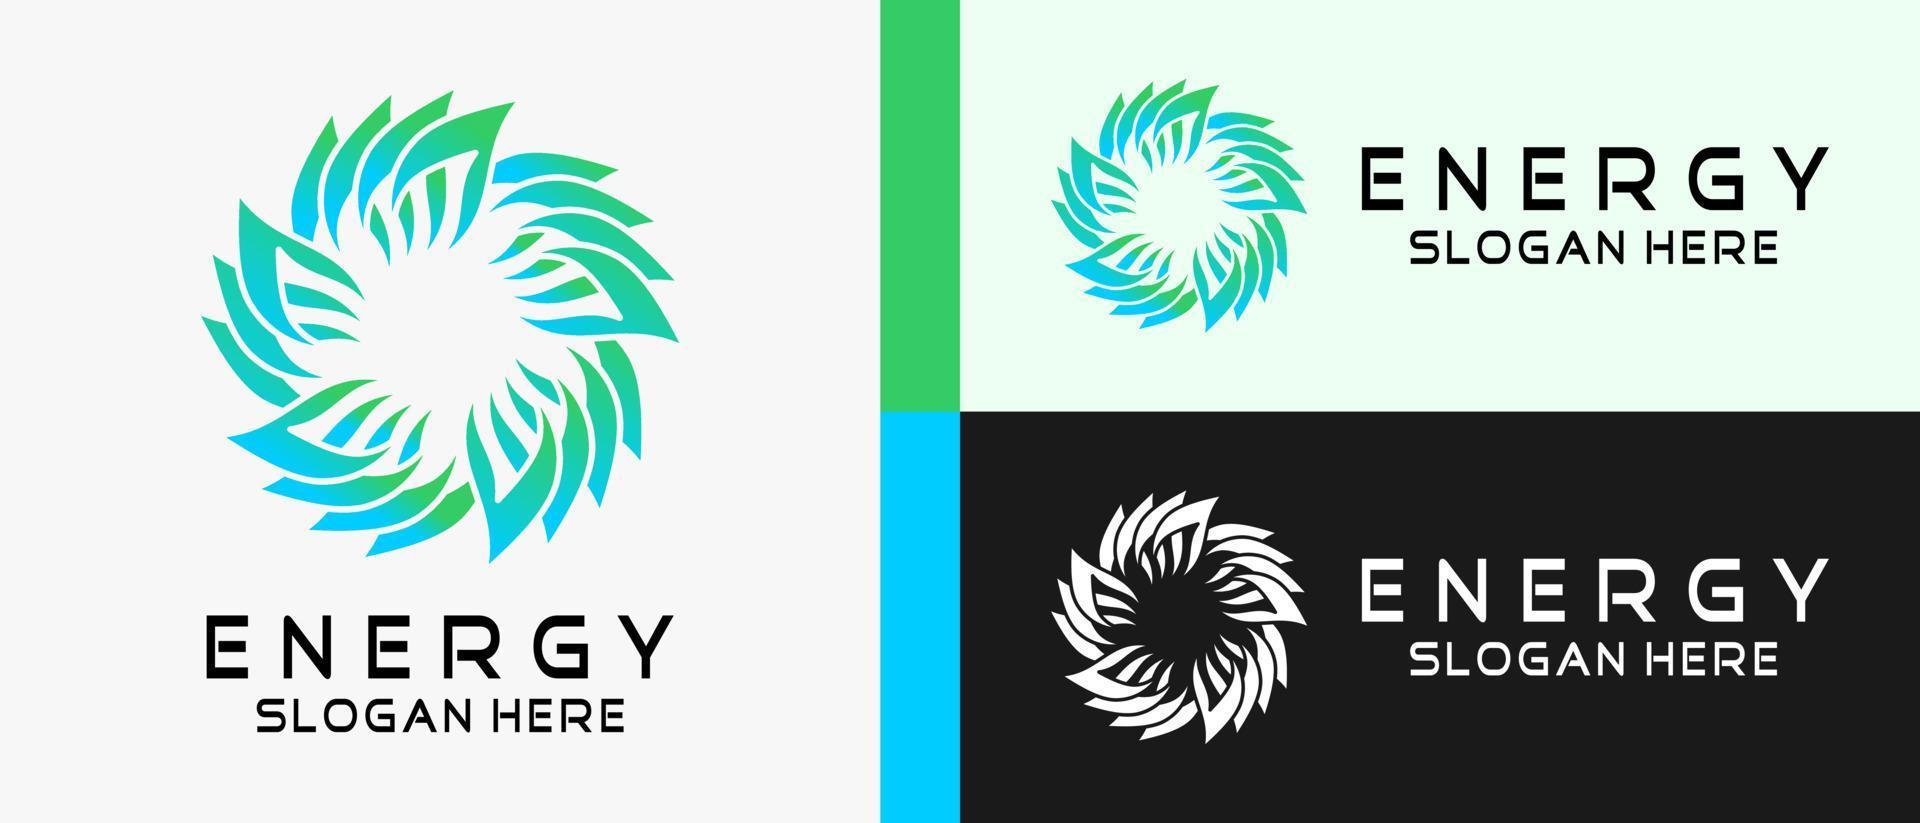 energy logo design template with creative abstract concept in the form of flowers. premium vector logo illustration